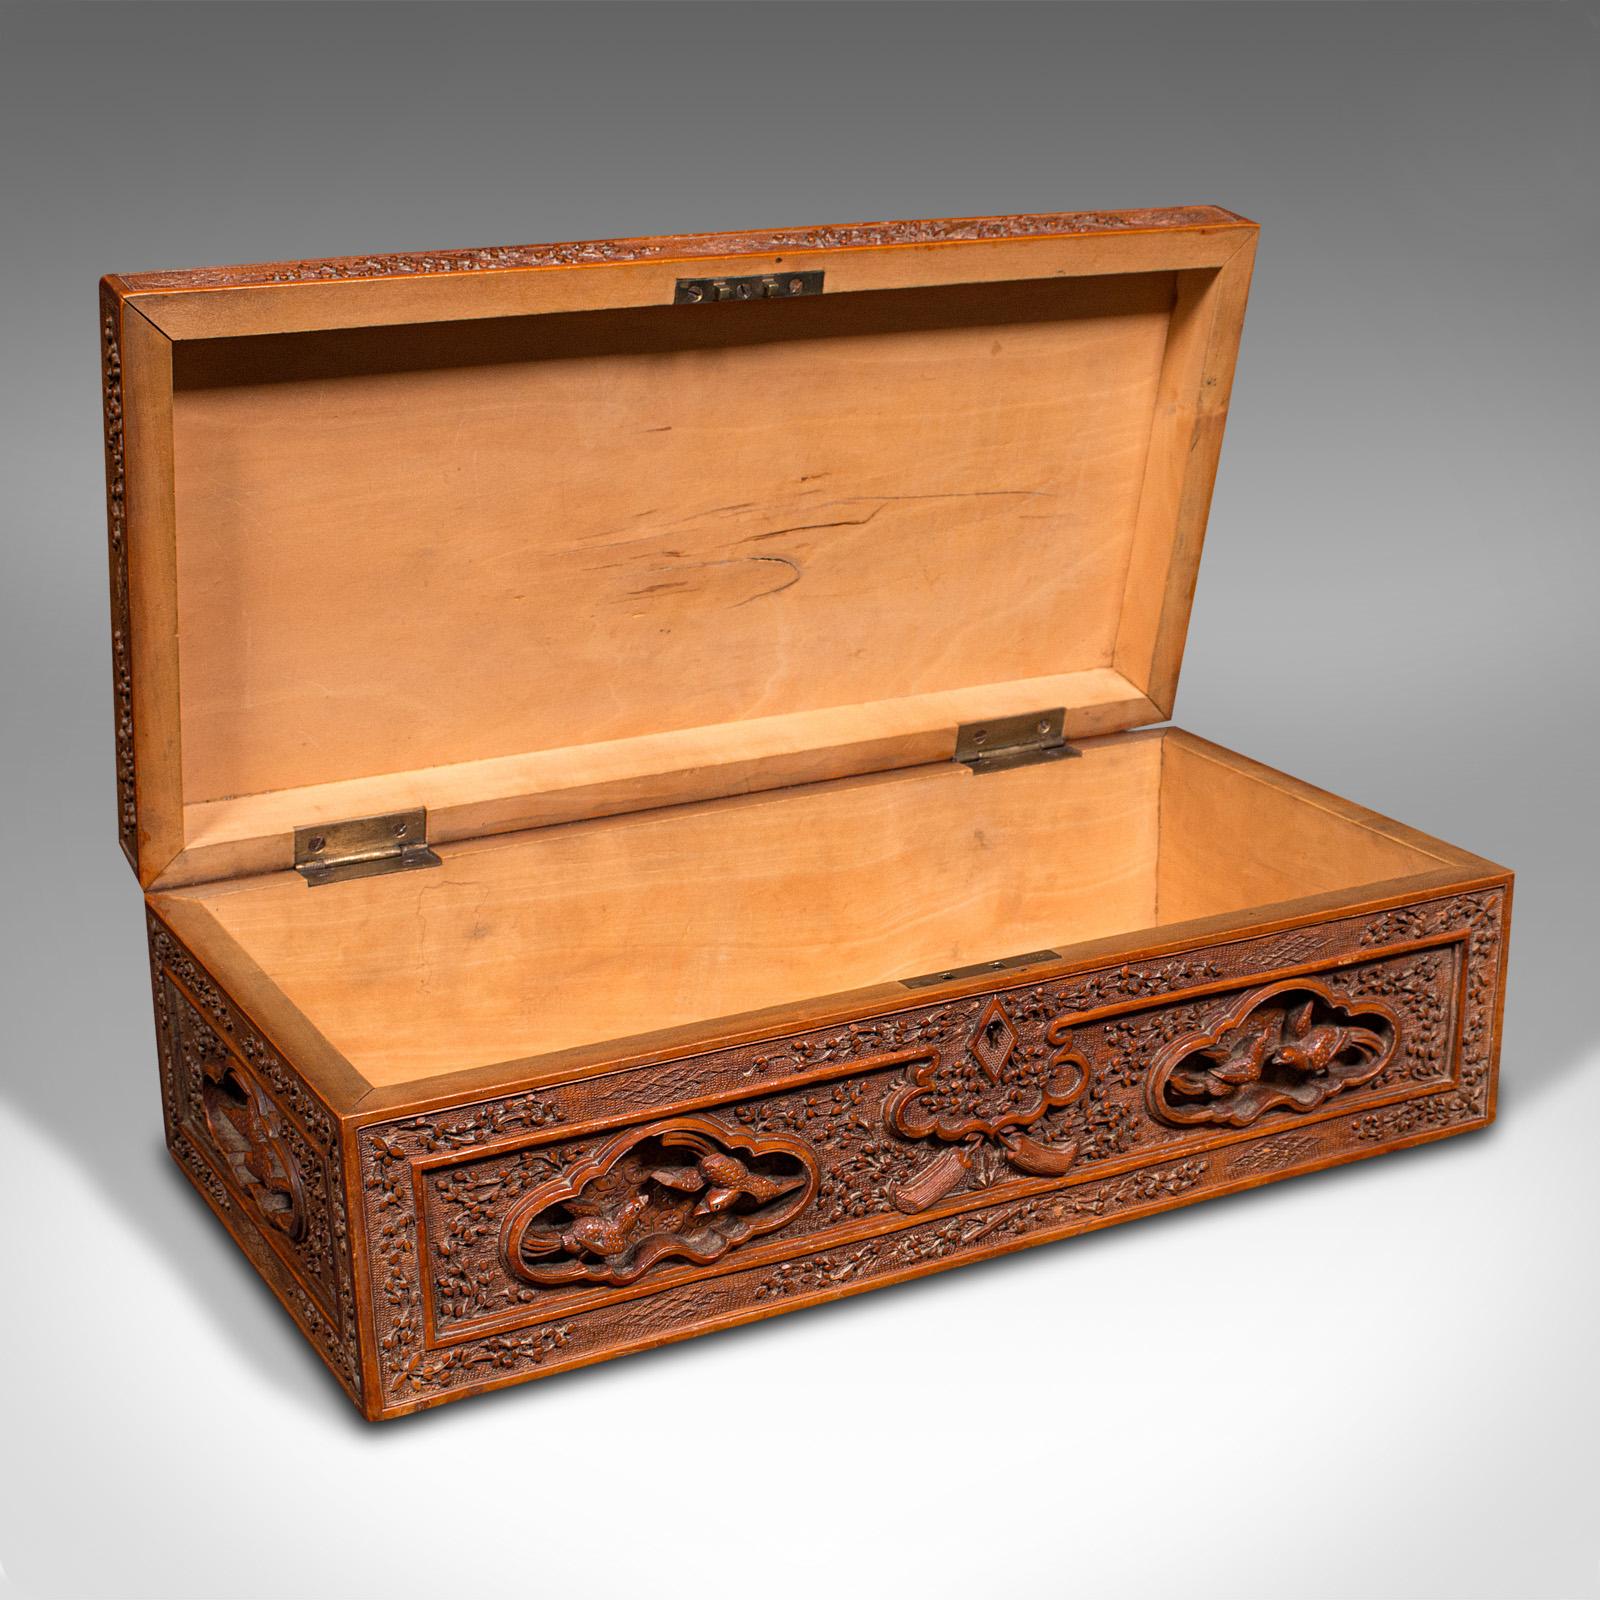 This is a vintage carved keepsake case. A Chinese, satinwood decorative box, dating to the mid 20th century, circa 1950.

Profusely carved throughout with an abundance of Oriental craftsmanship
Displaying a desirable aged patina - some small loss to